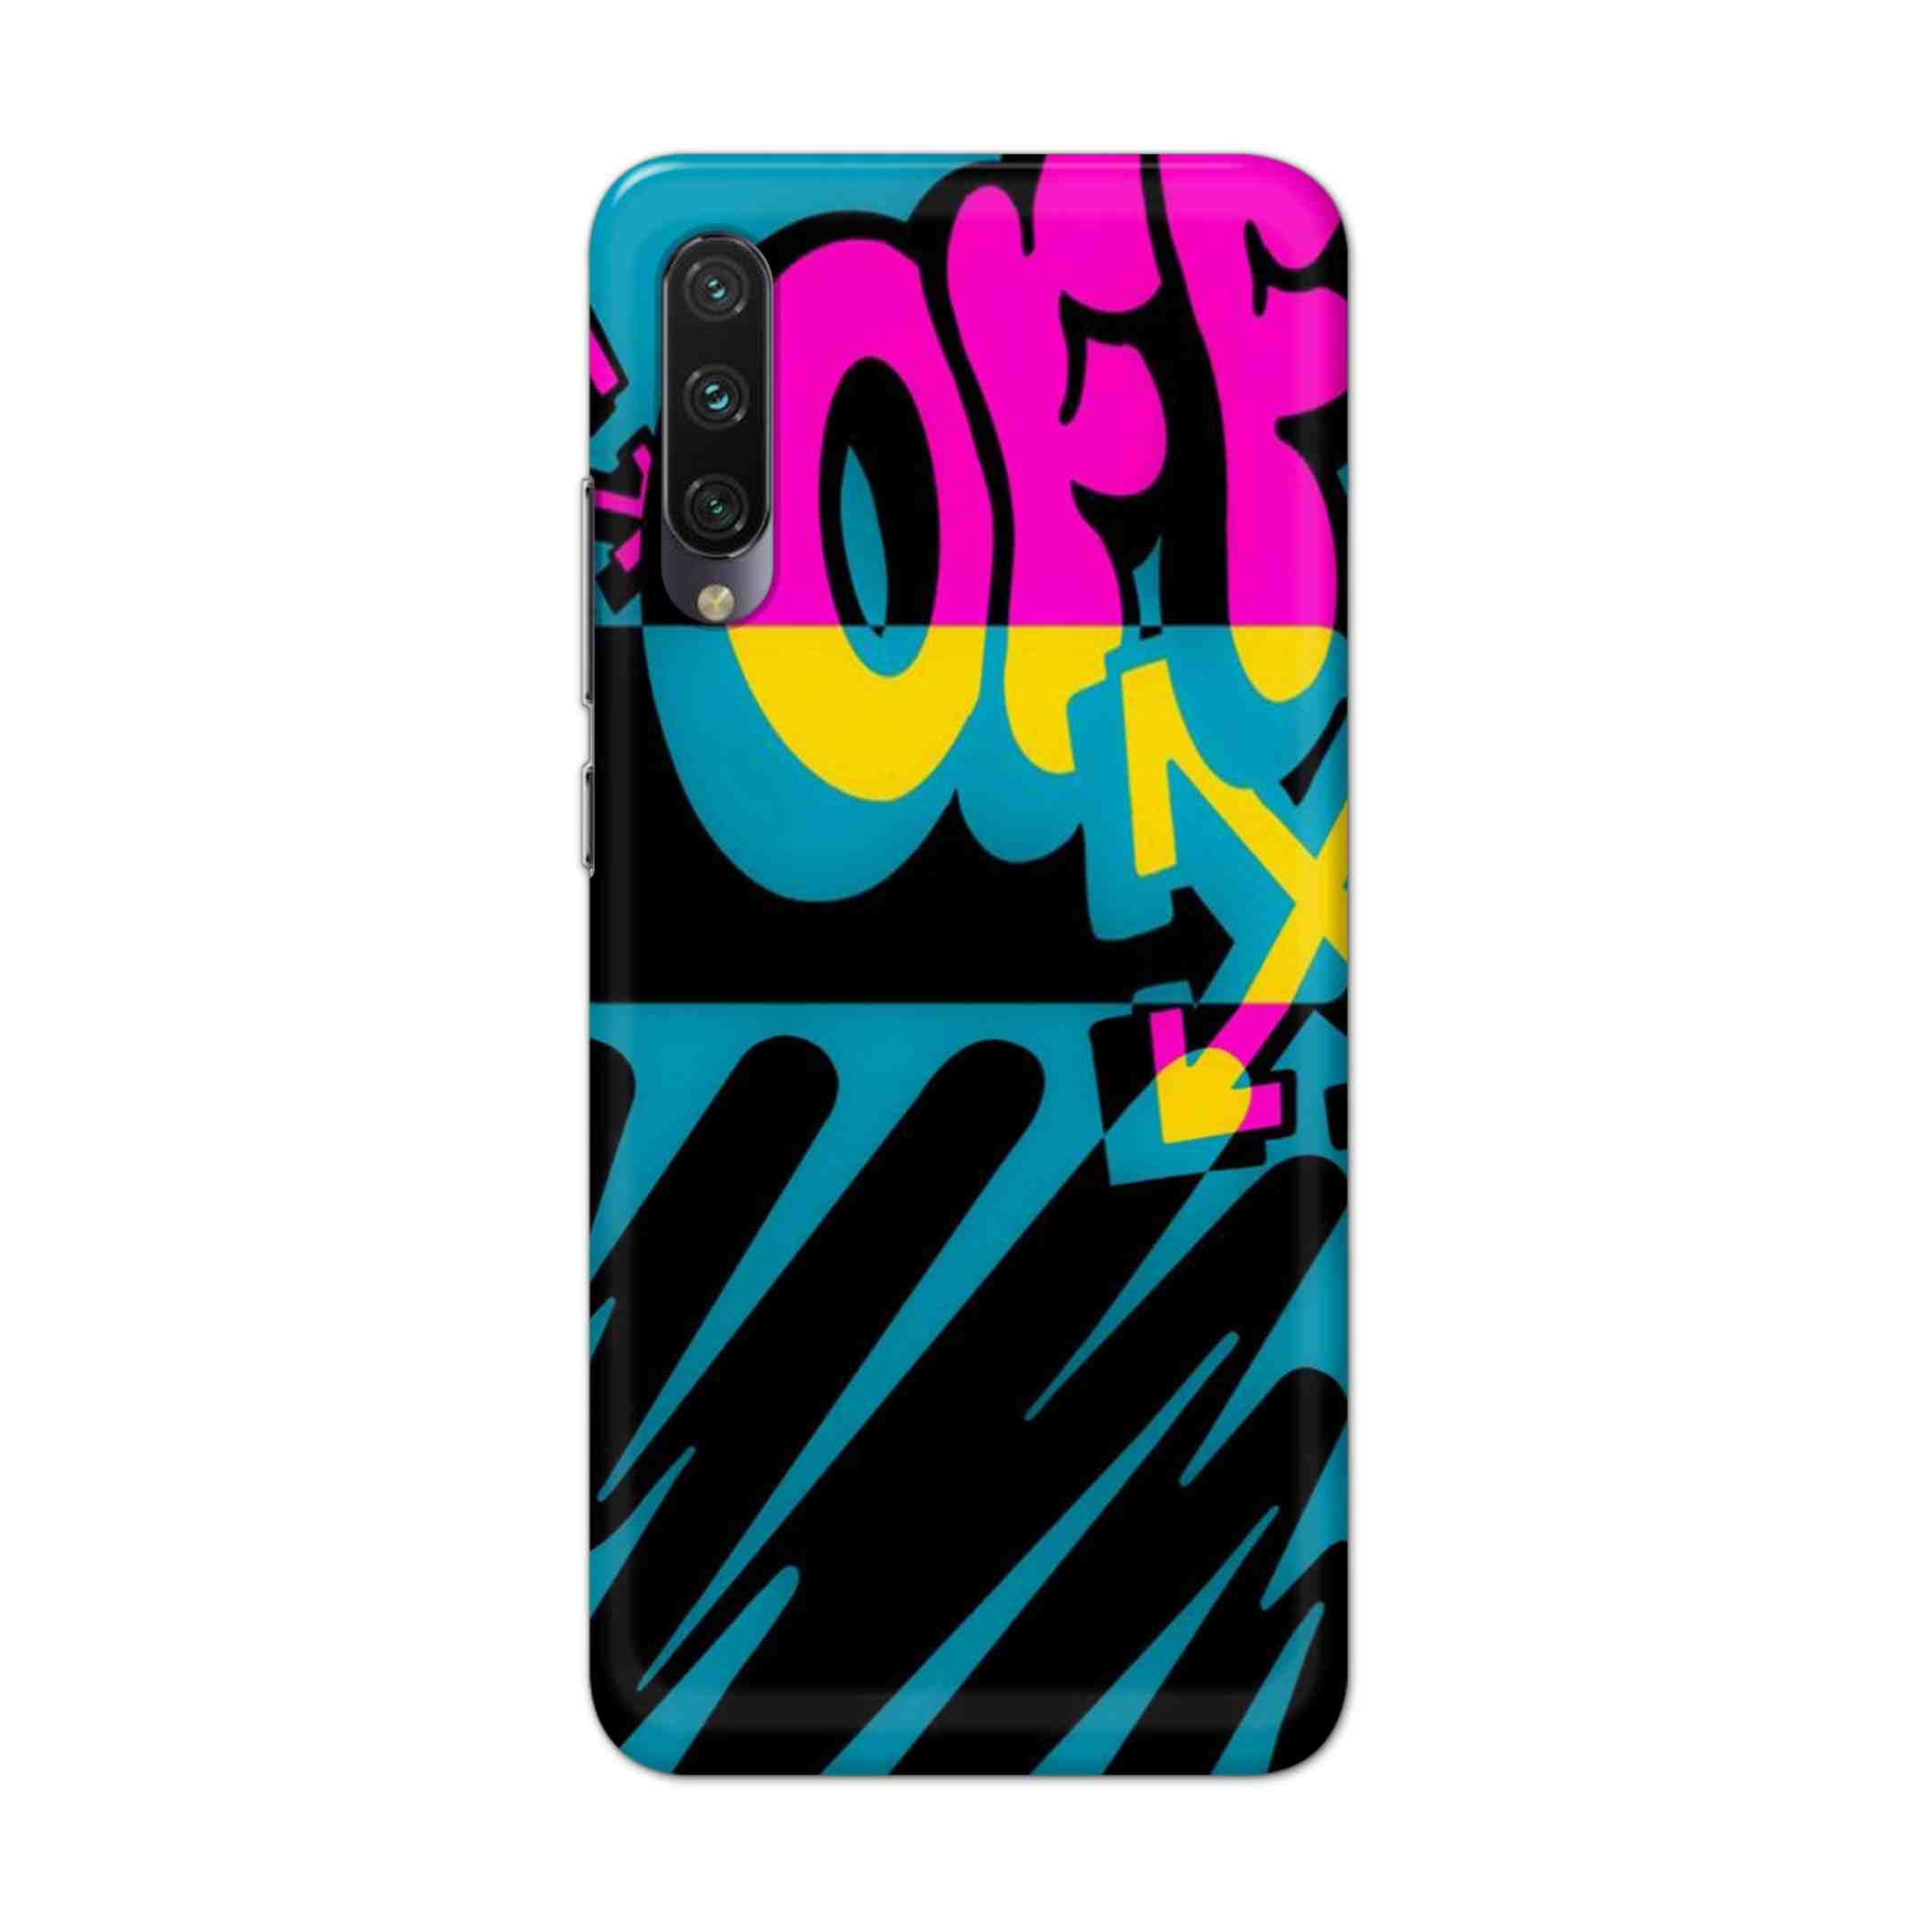 Buy Off Hard Back Mobile Phone Case Cover For Xiaomi Mi A3 Online